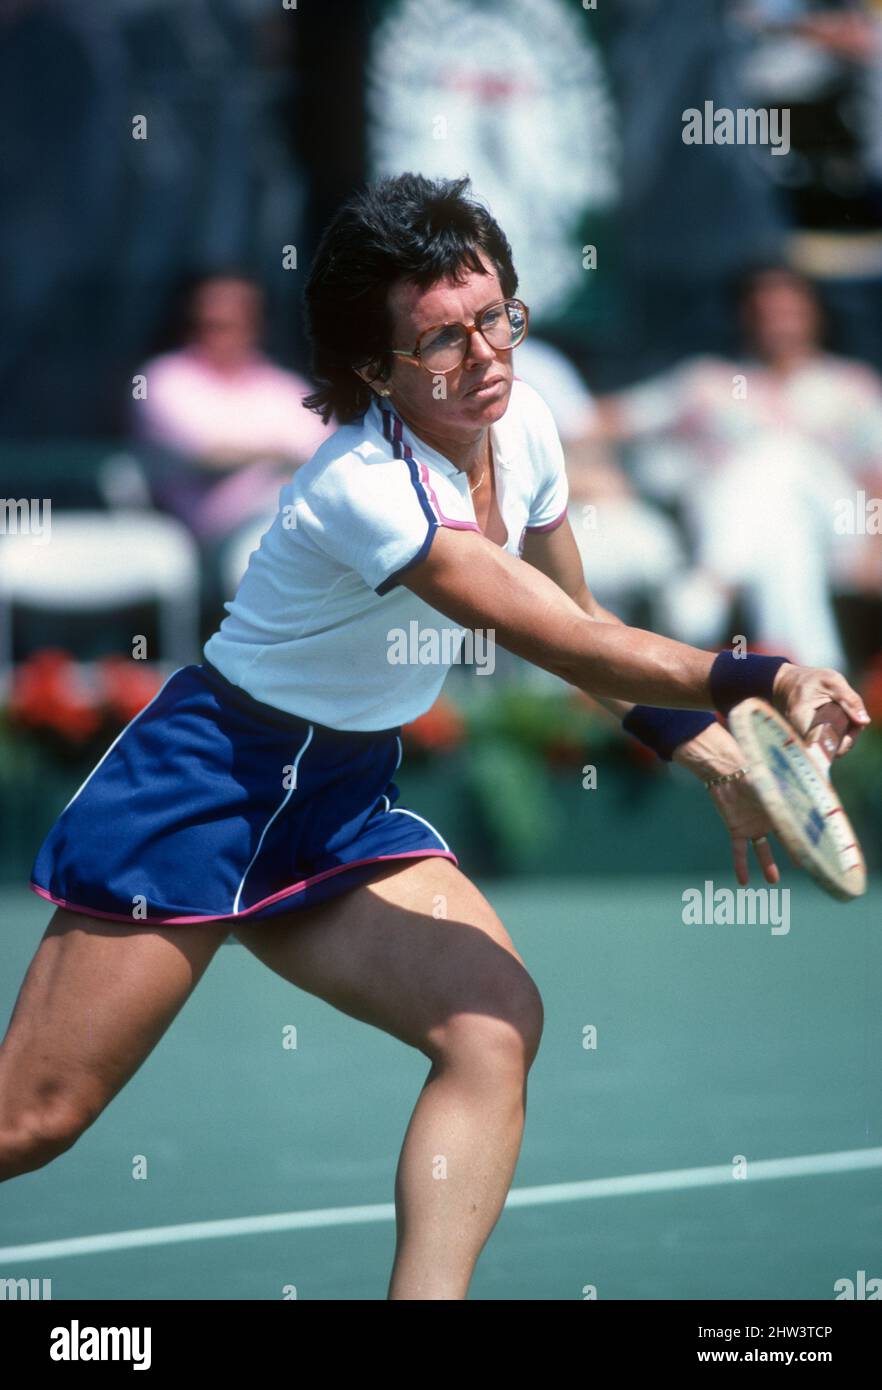 Billie Jean King hitting a forehand approach shot during match at Louis Armstrong Stadium in Flushing Meadows at the 1979 U.S. Open. Stock Photo